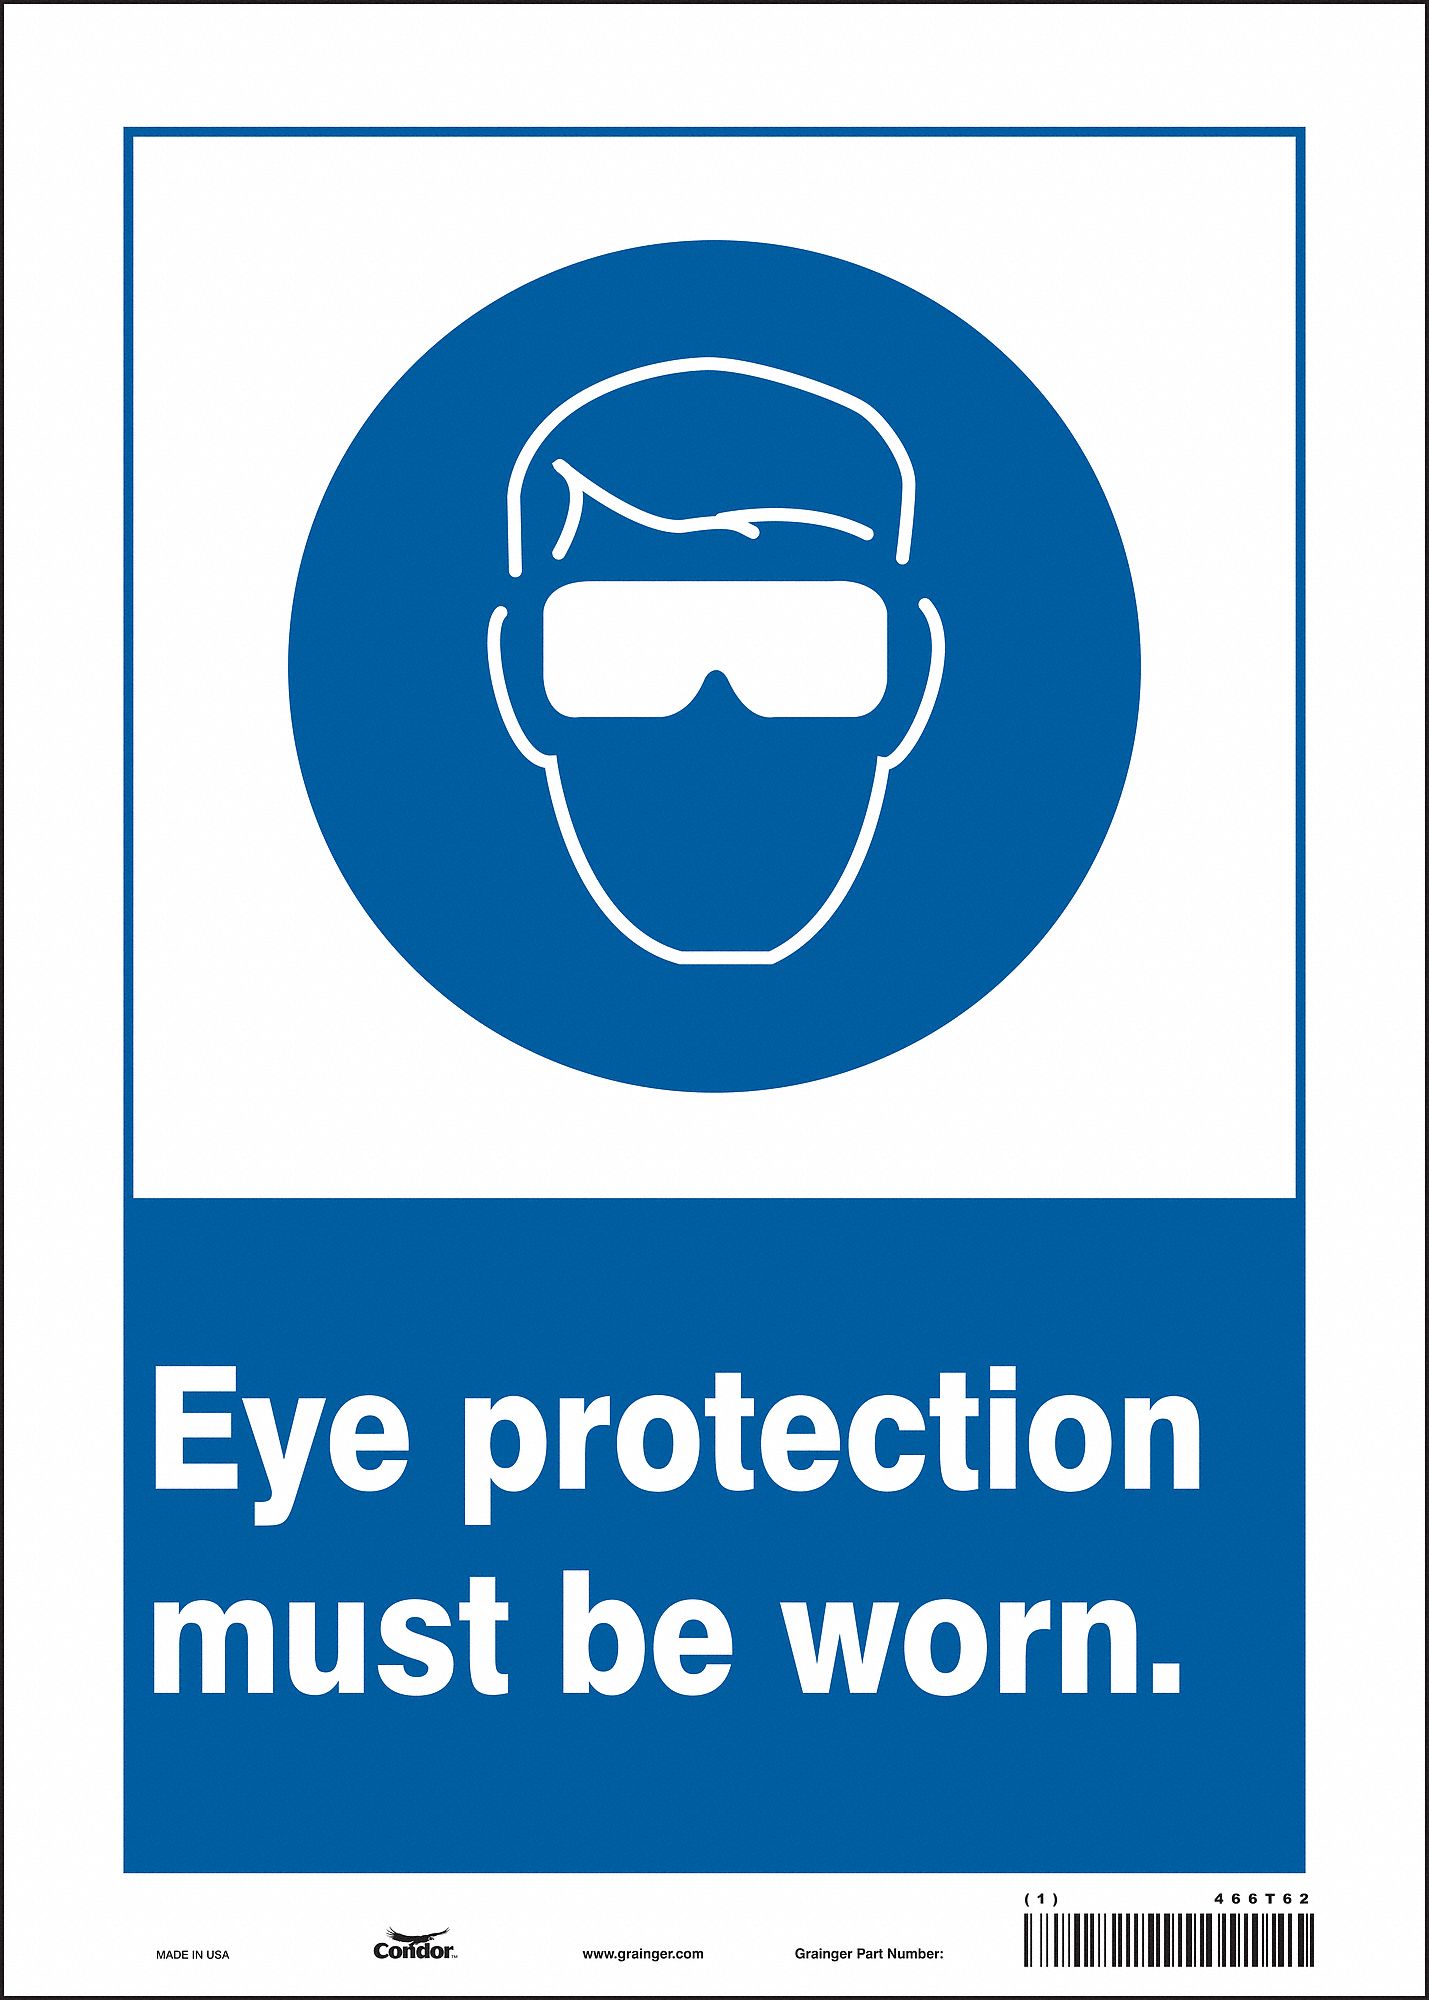 Eye Protection Must Be Worn In This Area Sign